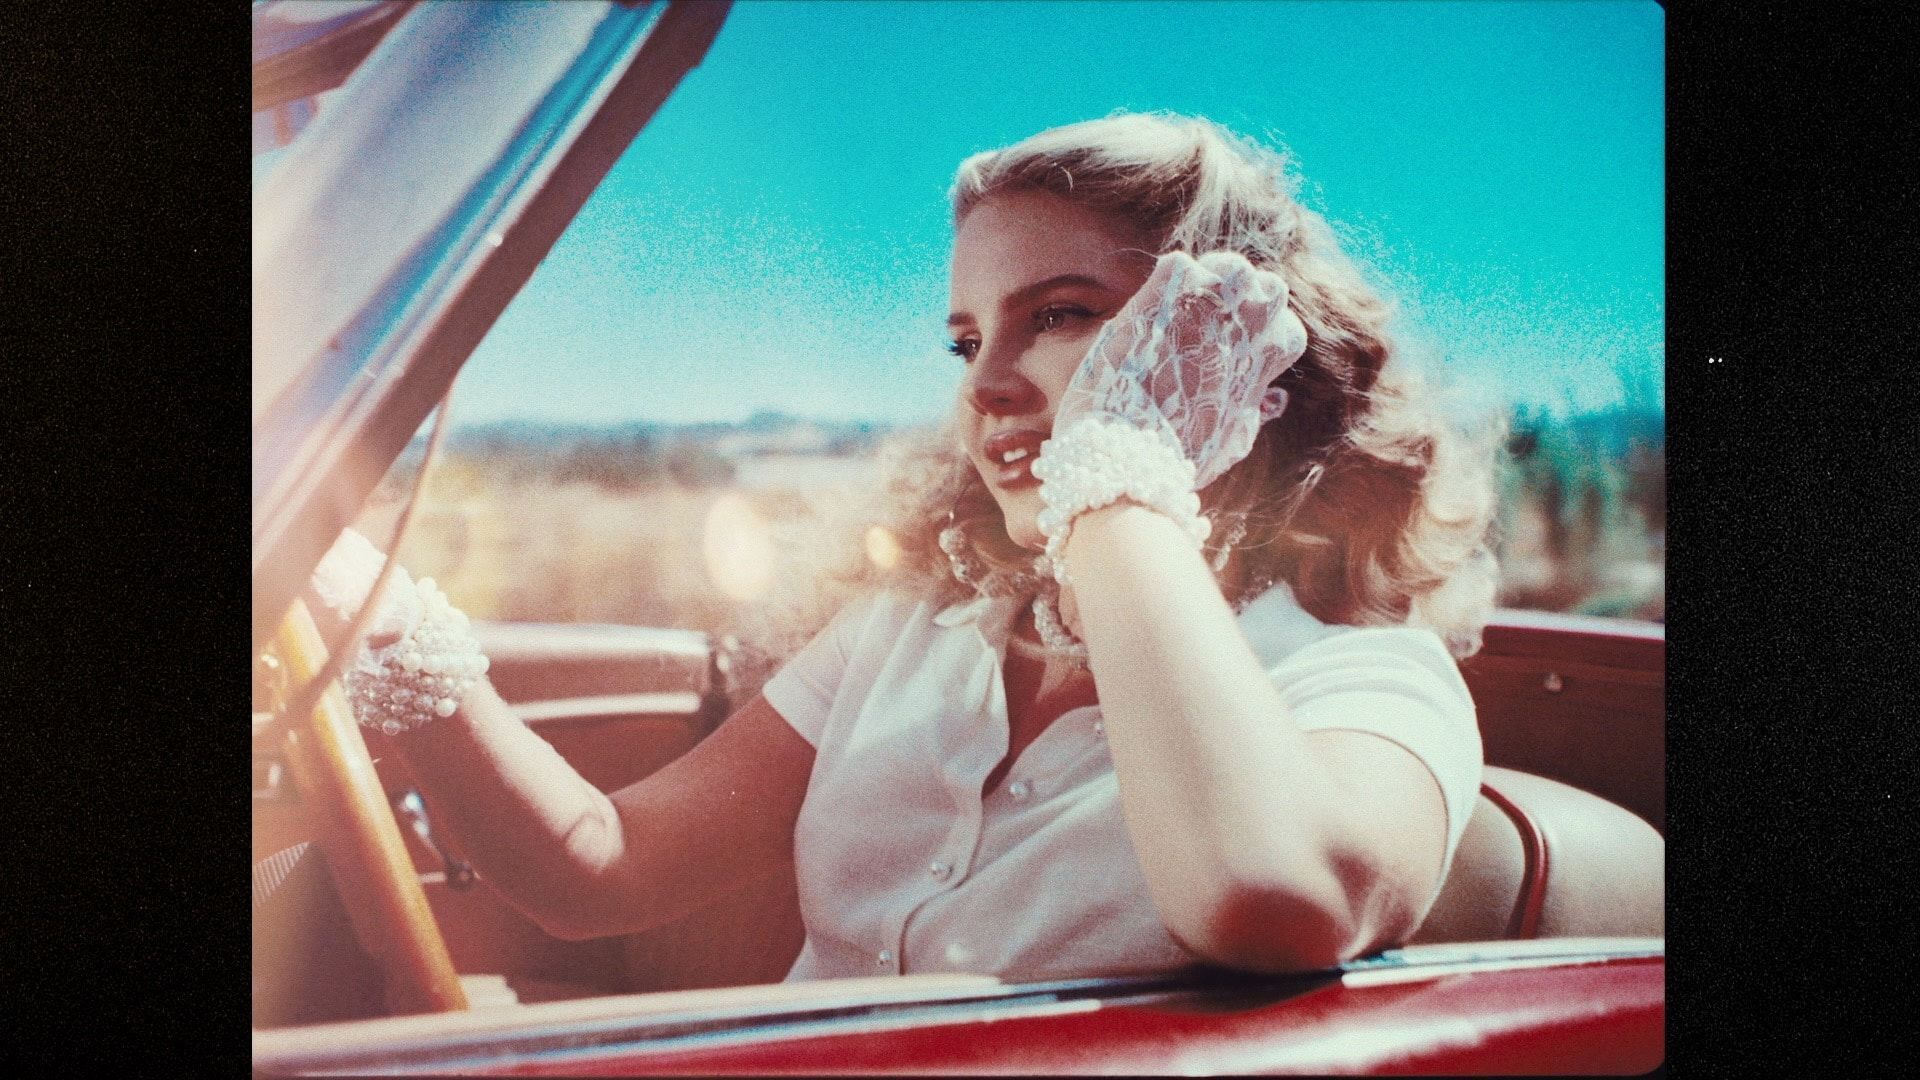 A woman in a convertible car, wearing a white lace glove on her left hand. - Lana Del Rey